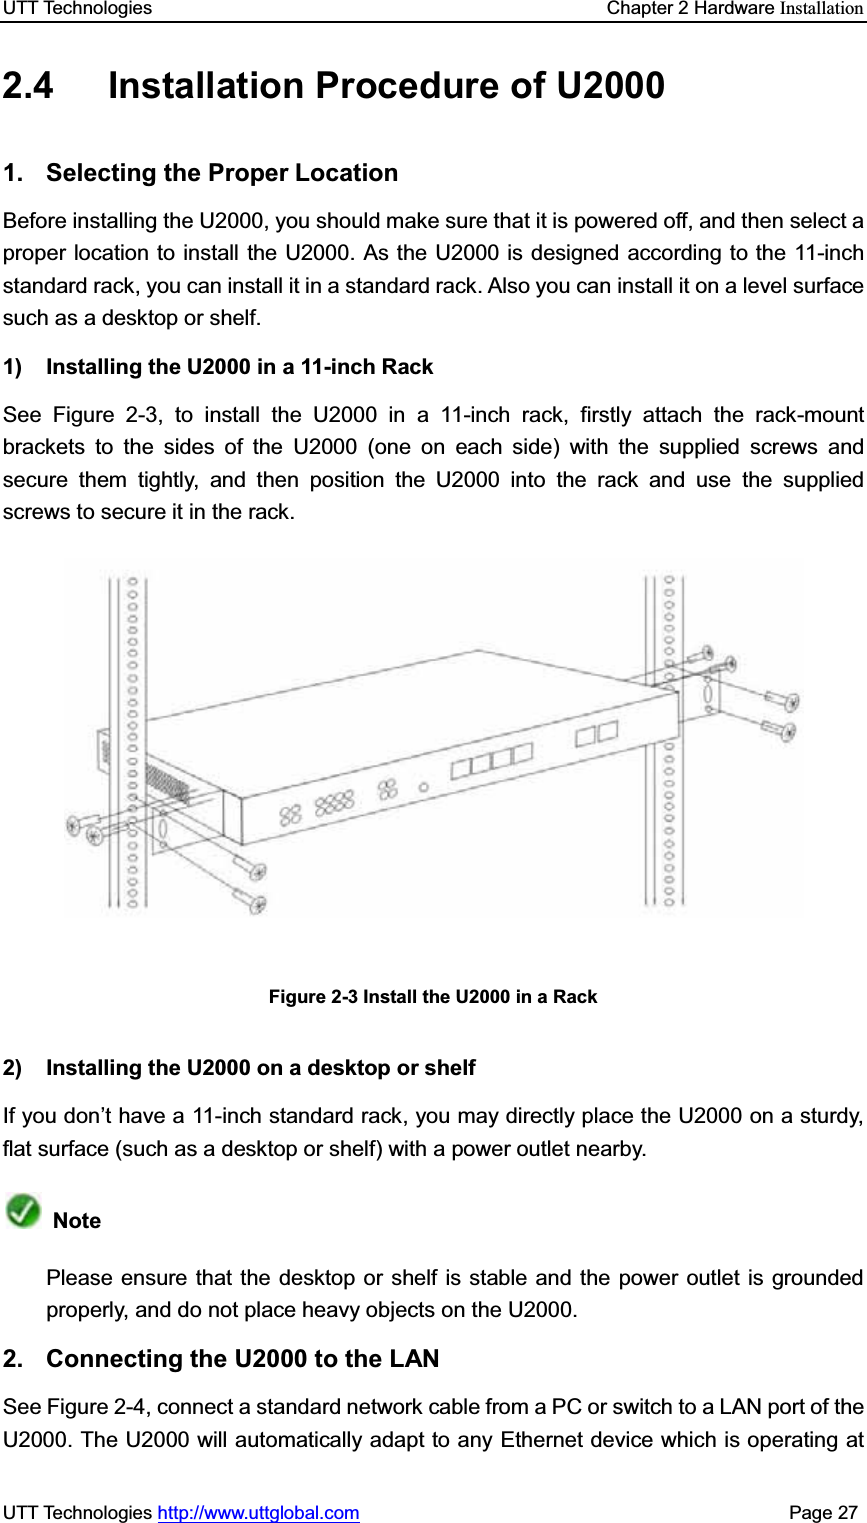 UTT Technologies    Chapter 2 Hardware InstallationUTT Technologies http://www.uttglobal.com                                              Page 27 2.4  Installation Procedure of U2000 1. Selecting the Proper Location Before installing the U2000, you should make sure that it is powered off, and then select a proper location to install the U2000. As the U2000 is designed according to the 11-inch standard rack, you can install it in a standard rack. Also you can install it on a level surfacesuch as a desktop or shelf. 1) Installing the U2000 in a 11-inch Rack See Figure 2-3, to install the U2000 in a 11-inch rack, firstly attach the rack-mount brackets to the sides of the U2000 (one on each side) with the supplied screws and secure them tightly, and then position the U2000 into the rack and use the supplied screws to secure it in the rack. Figure 2-3 Install the U2000 in a Rack 2)  Installing the U2000 on a desktop or shelf If you don¶t have a 11-inch standard rack, you may directly place the U2000 on a sturdy, flat surface (such as a desktop or shelf) with a power outlet nearby. NotePlease ensure that the desktop or shelf is stable and the power outlet is grounded properly, and do not place heavy objects on the U2000. 2.  Connecting the U2000 to the LAN See Figure 2-4, connect a standard network cable from a PC or switch to a LAN port of the U2000. The U2000 will automatically adapt to any Ethernet device which is operating at 